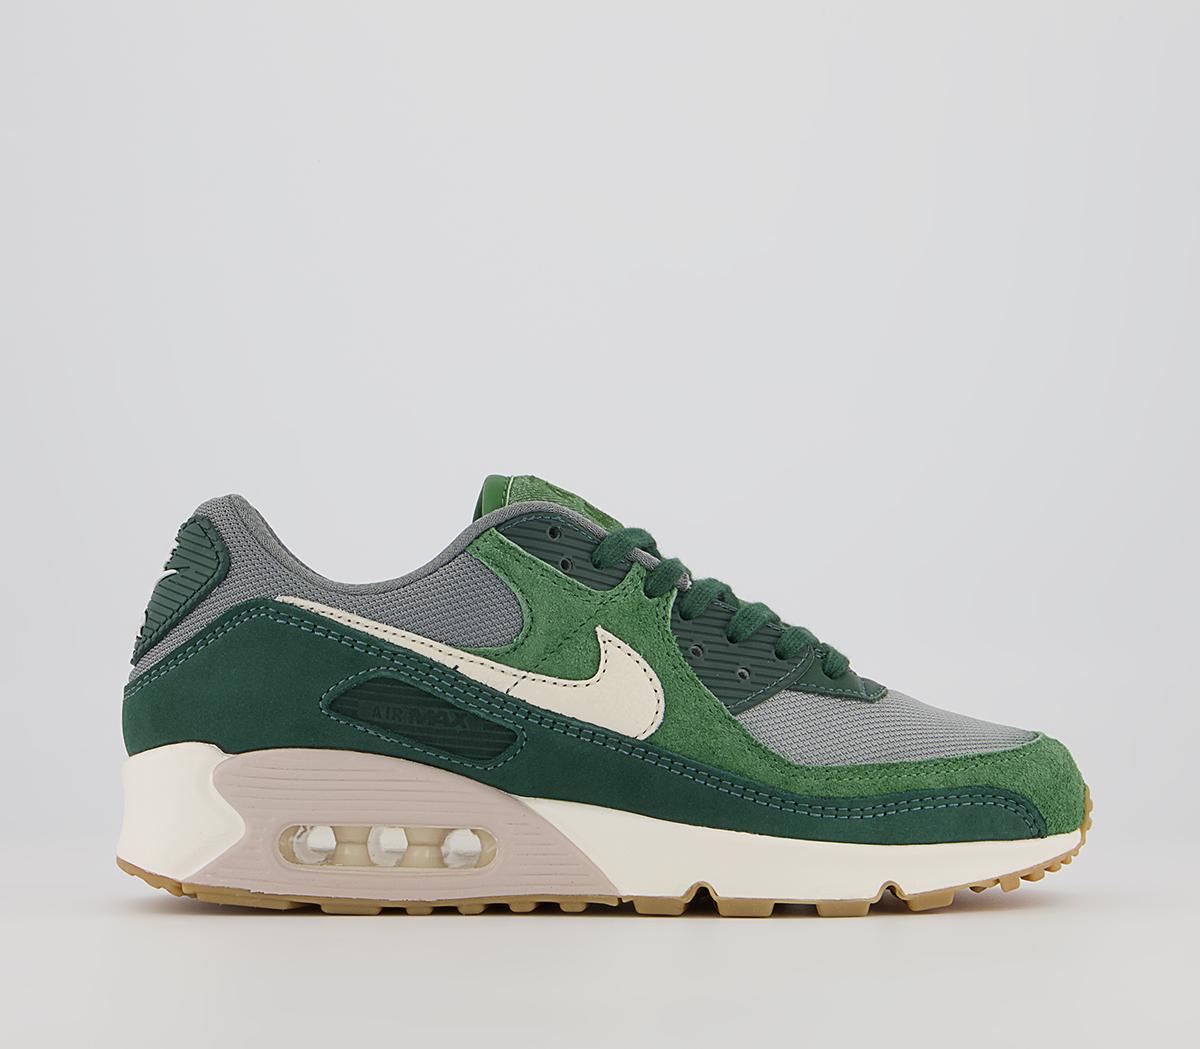 NikeAir Max 90 TrainersPro Green Pale Ivory Forest Green Smoke Grey Parti